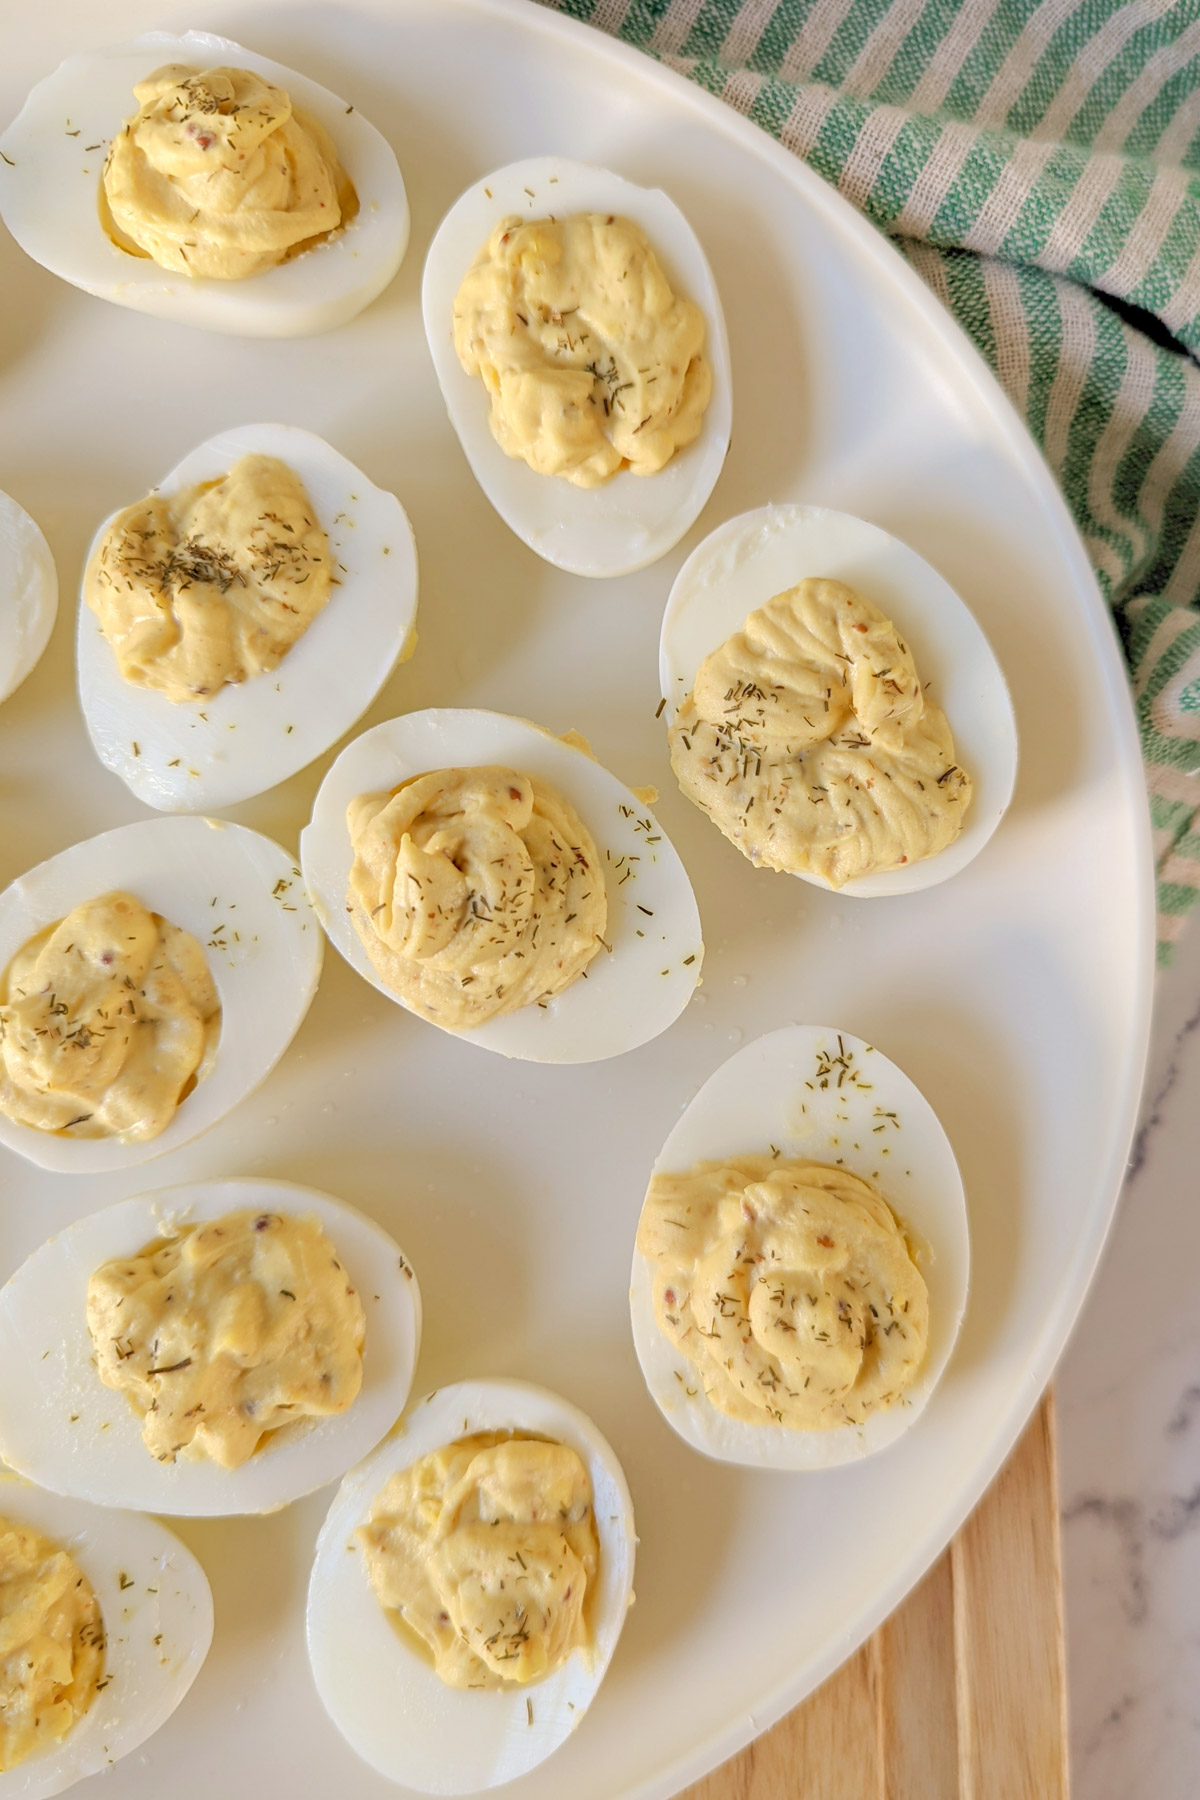 Deviled eggs without vinegar on a plate.